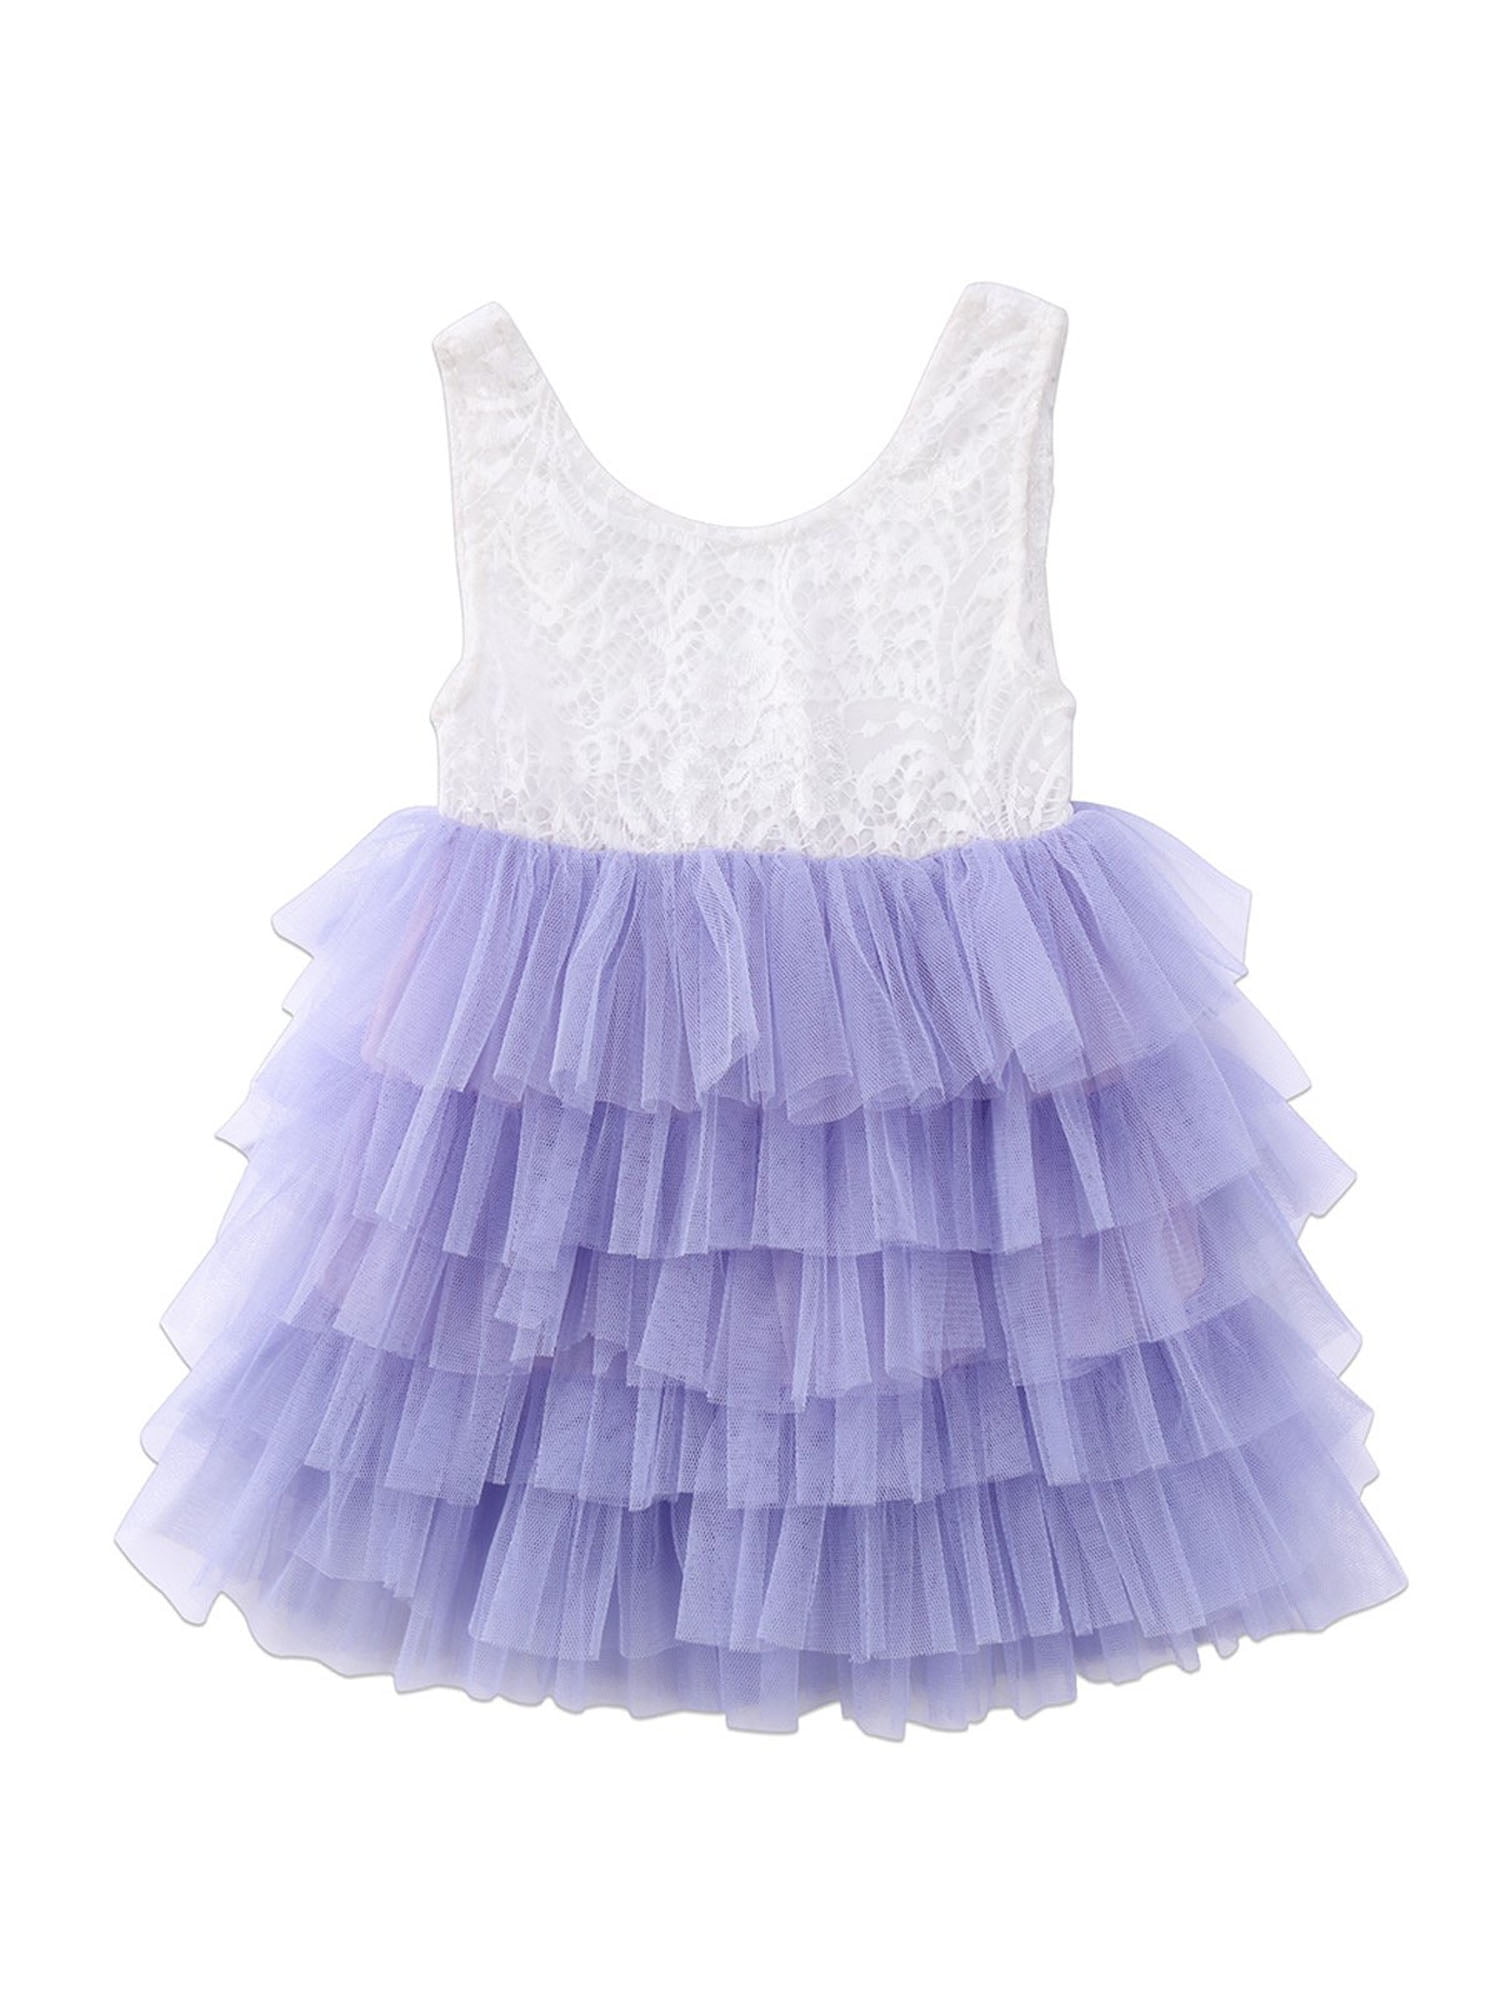 Newborn Kids Baby Girls Lace Tulle Party Pageant Bridesmaid Formal Tutu ...